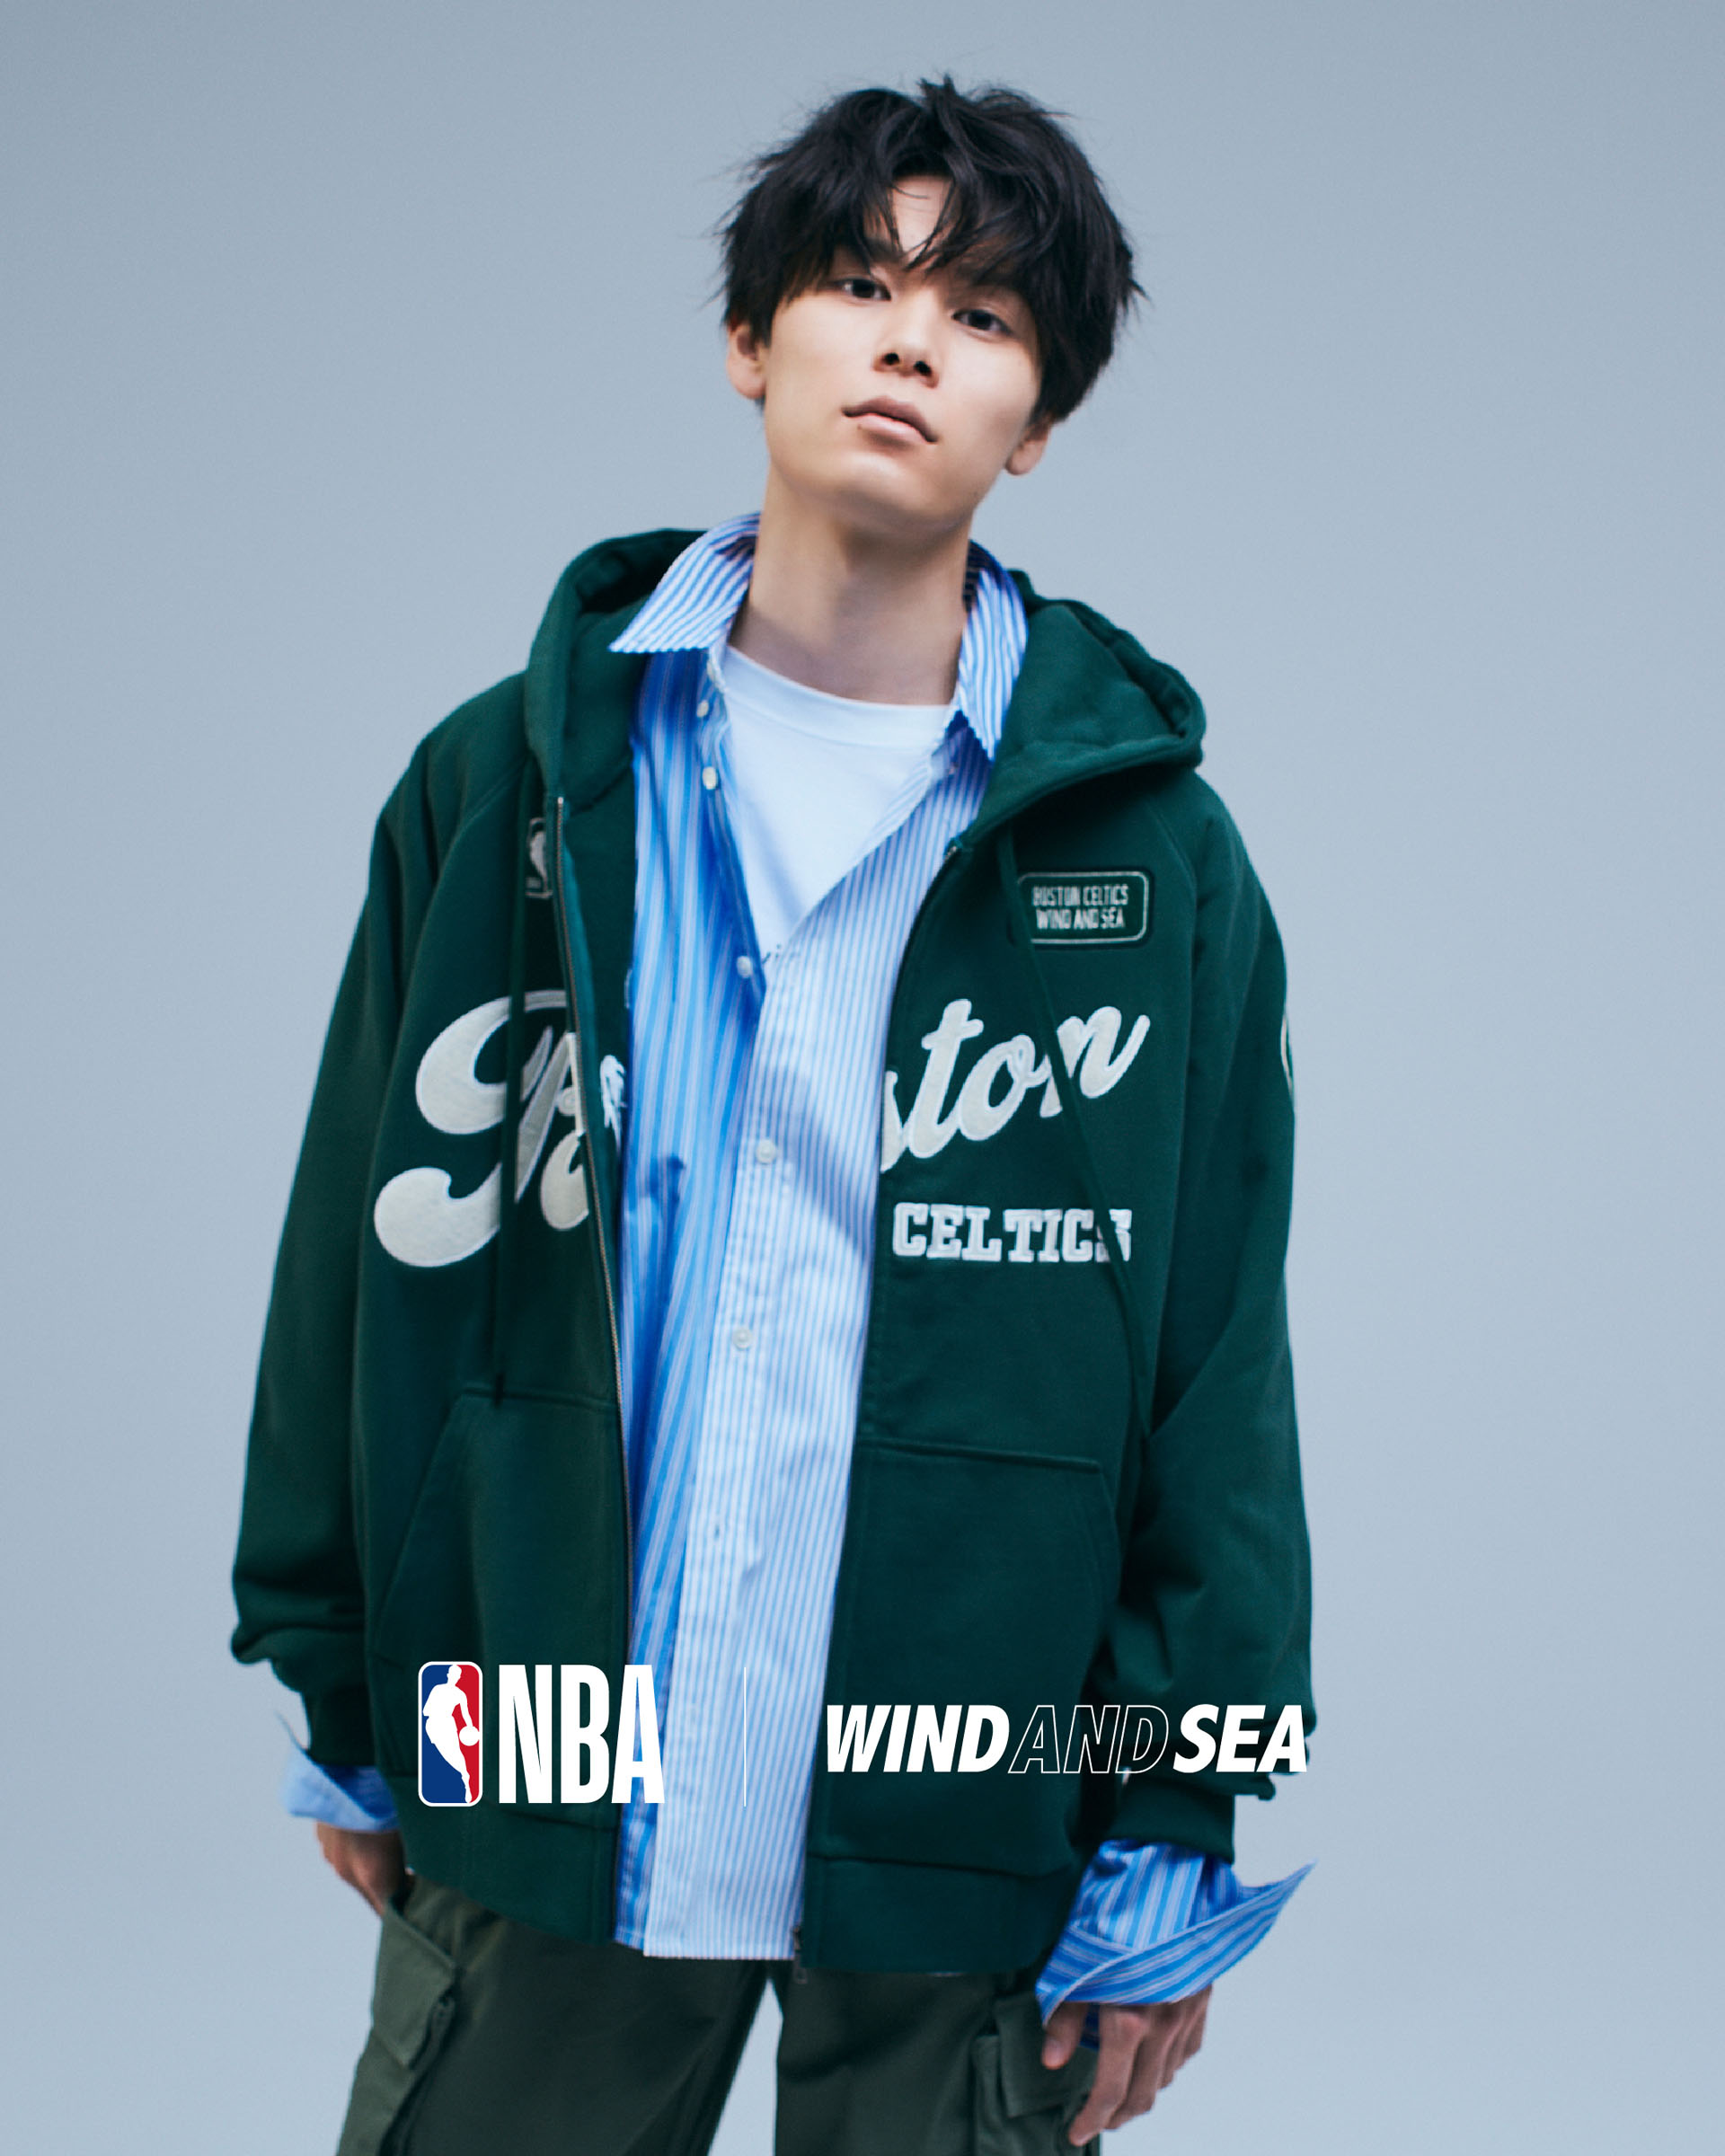 WIND AND SEAが「NBA PLAYOFFS LIMITED EDITIONカンファレンス ...